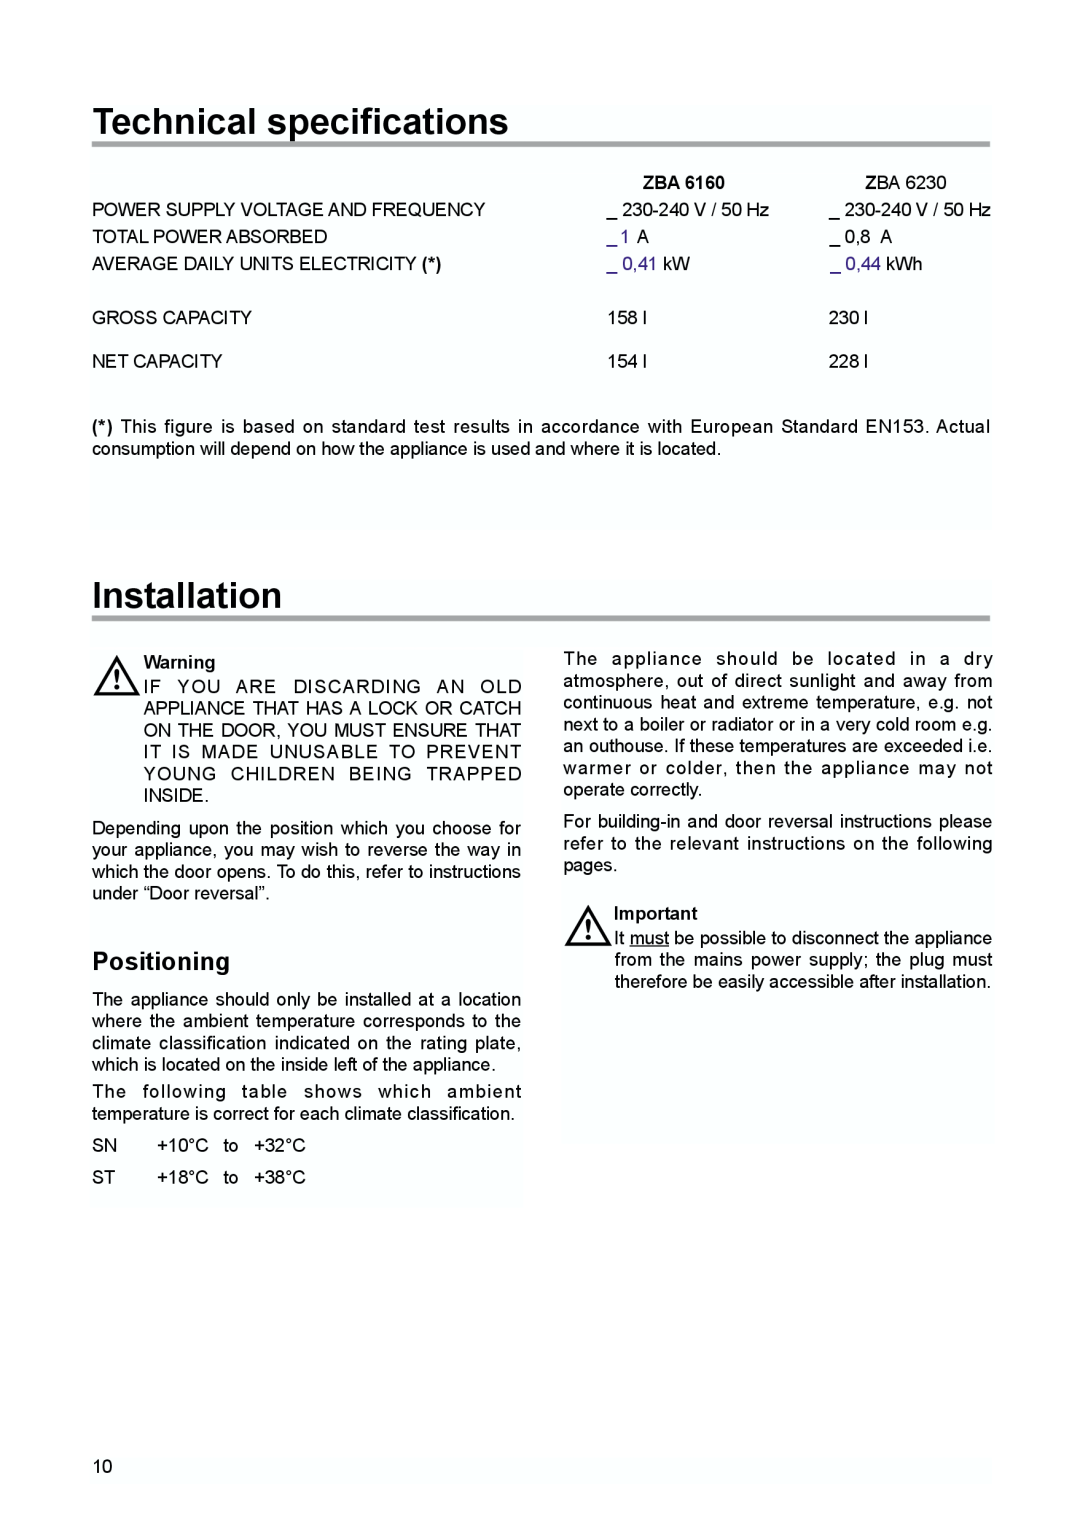 Zanussi ZBA 6160, ZBA 6230 manual Technical specifications, Installation, Positioning, 0,41 kW, 0,44 kWh 